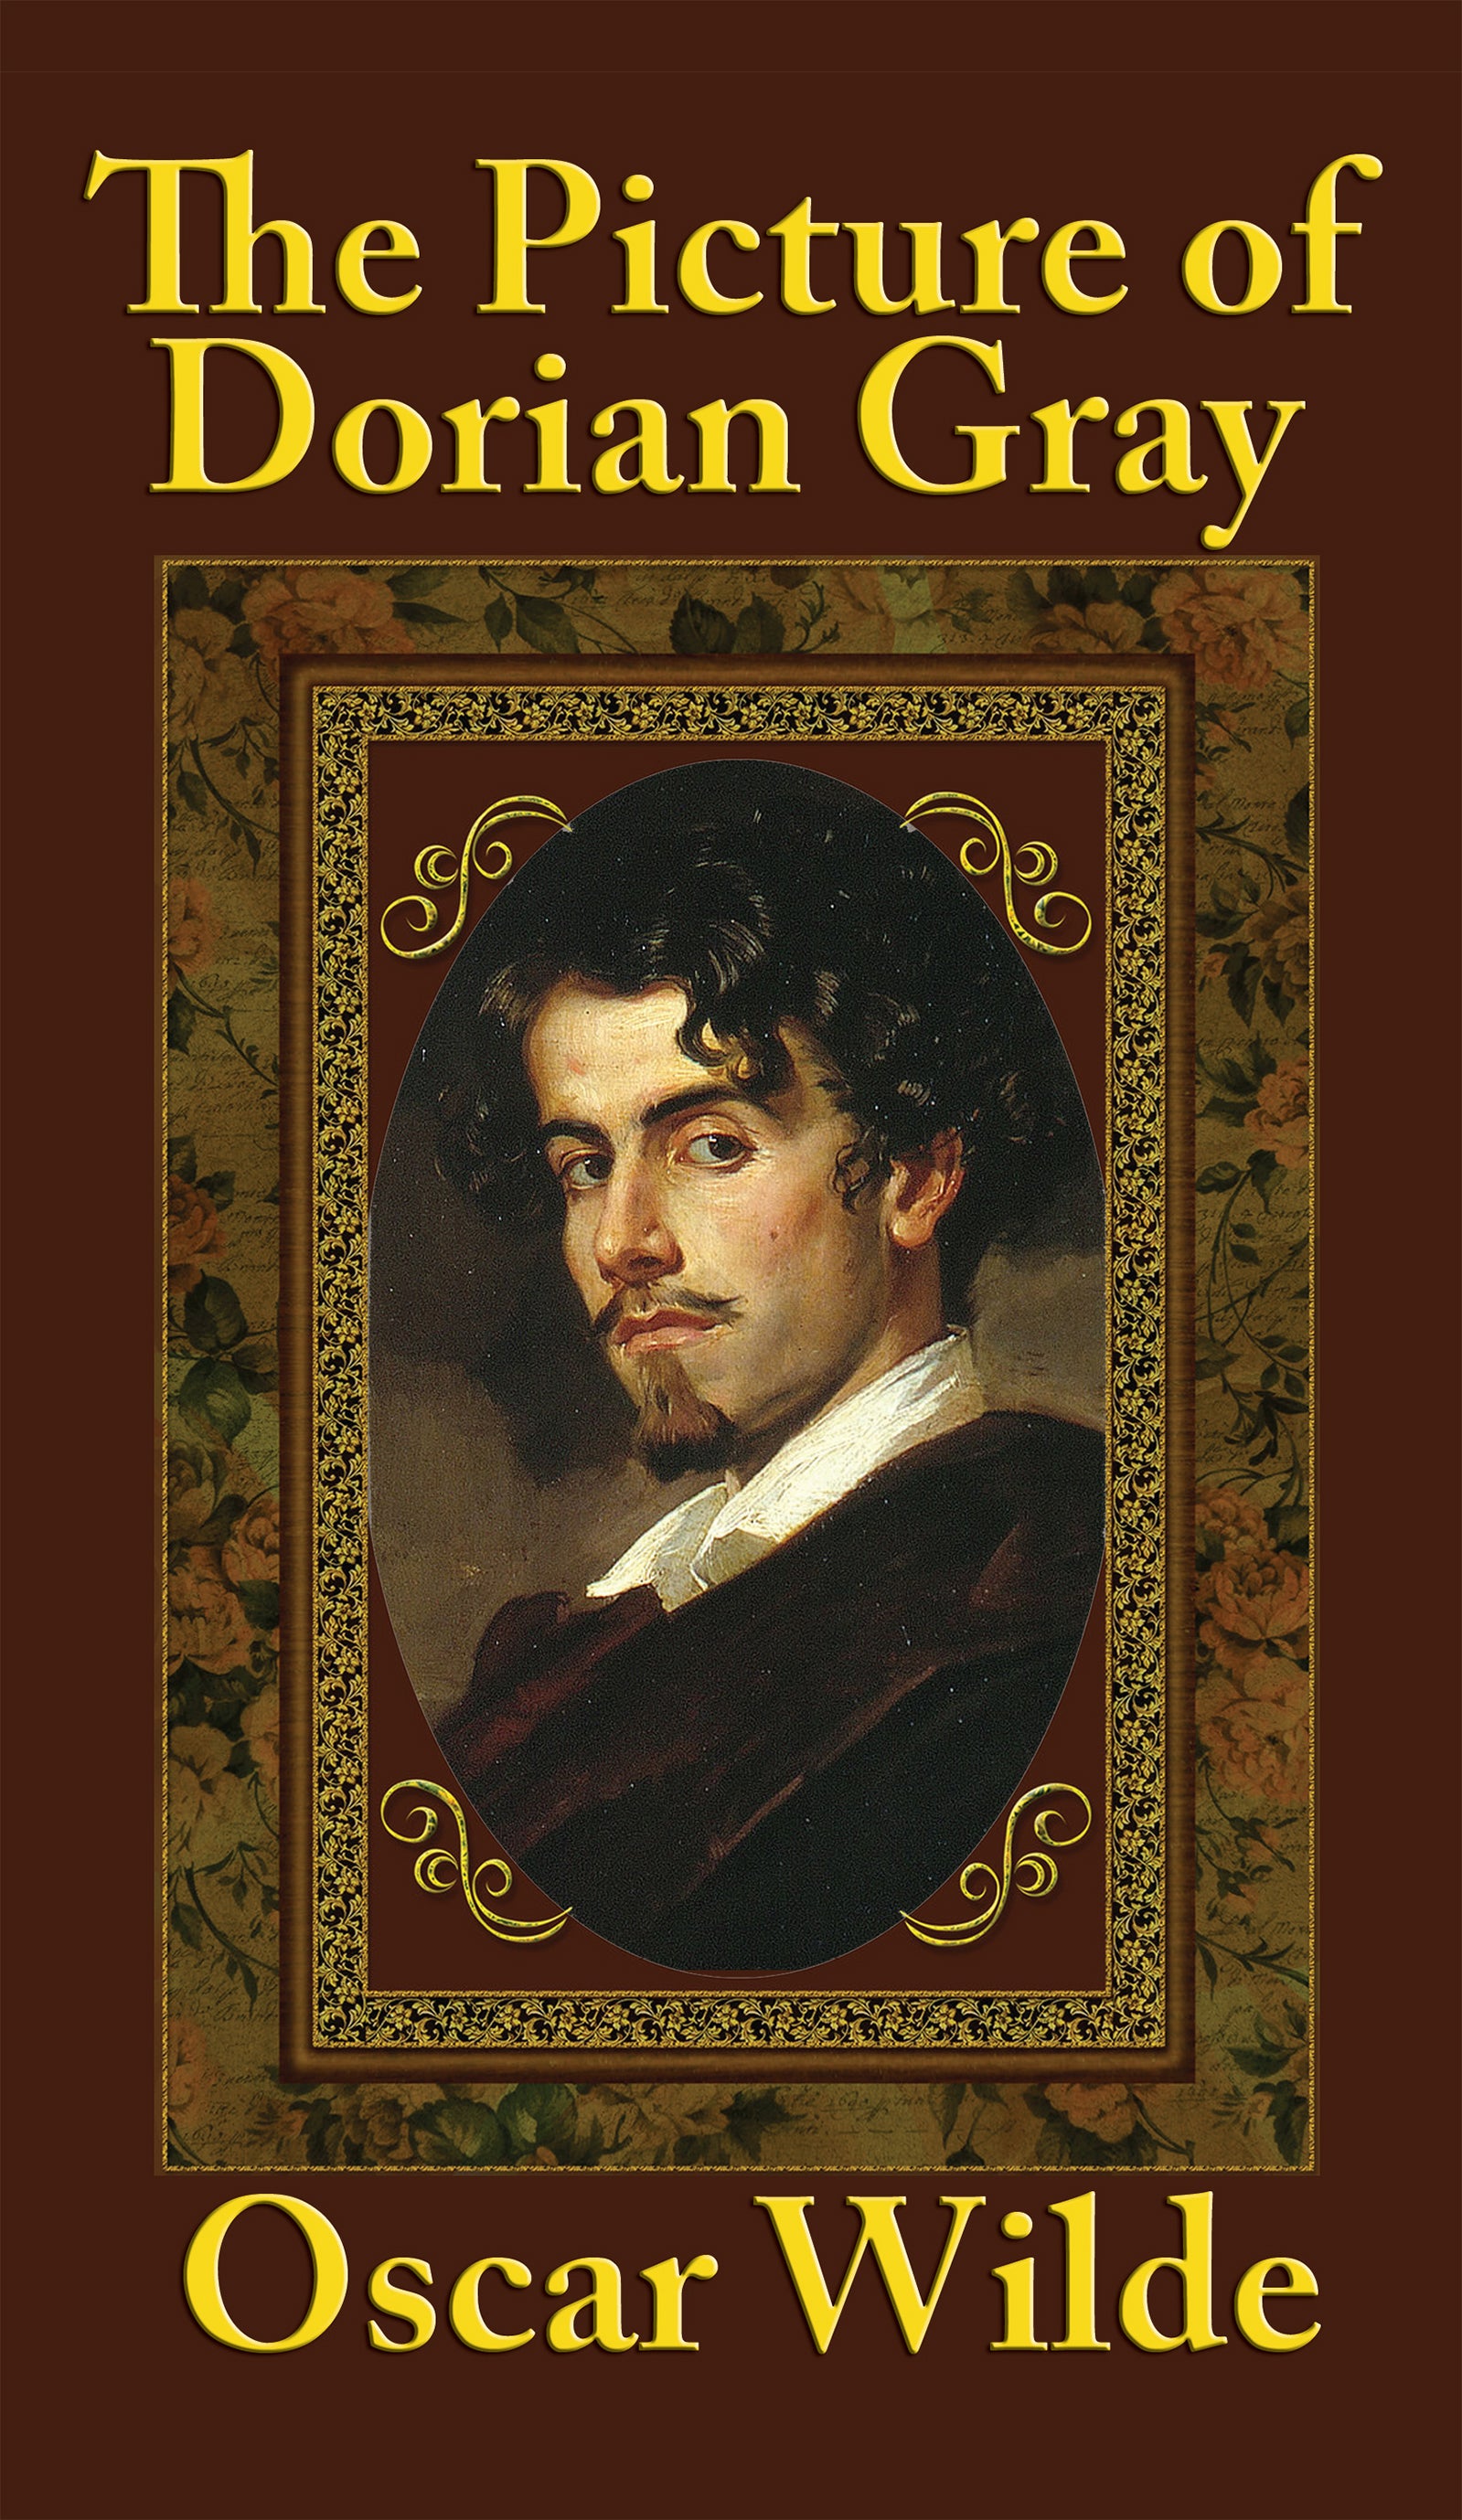 Cover for The Picture of Dorian Gray: a man's portrait hung in a golden frame.